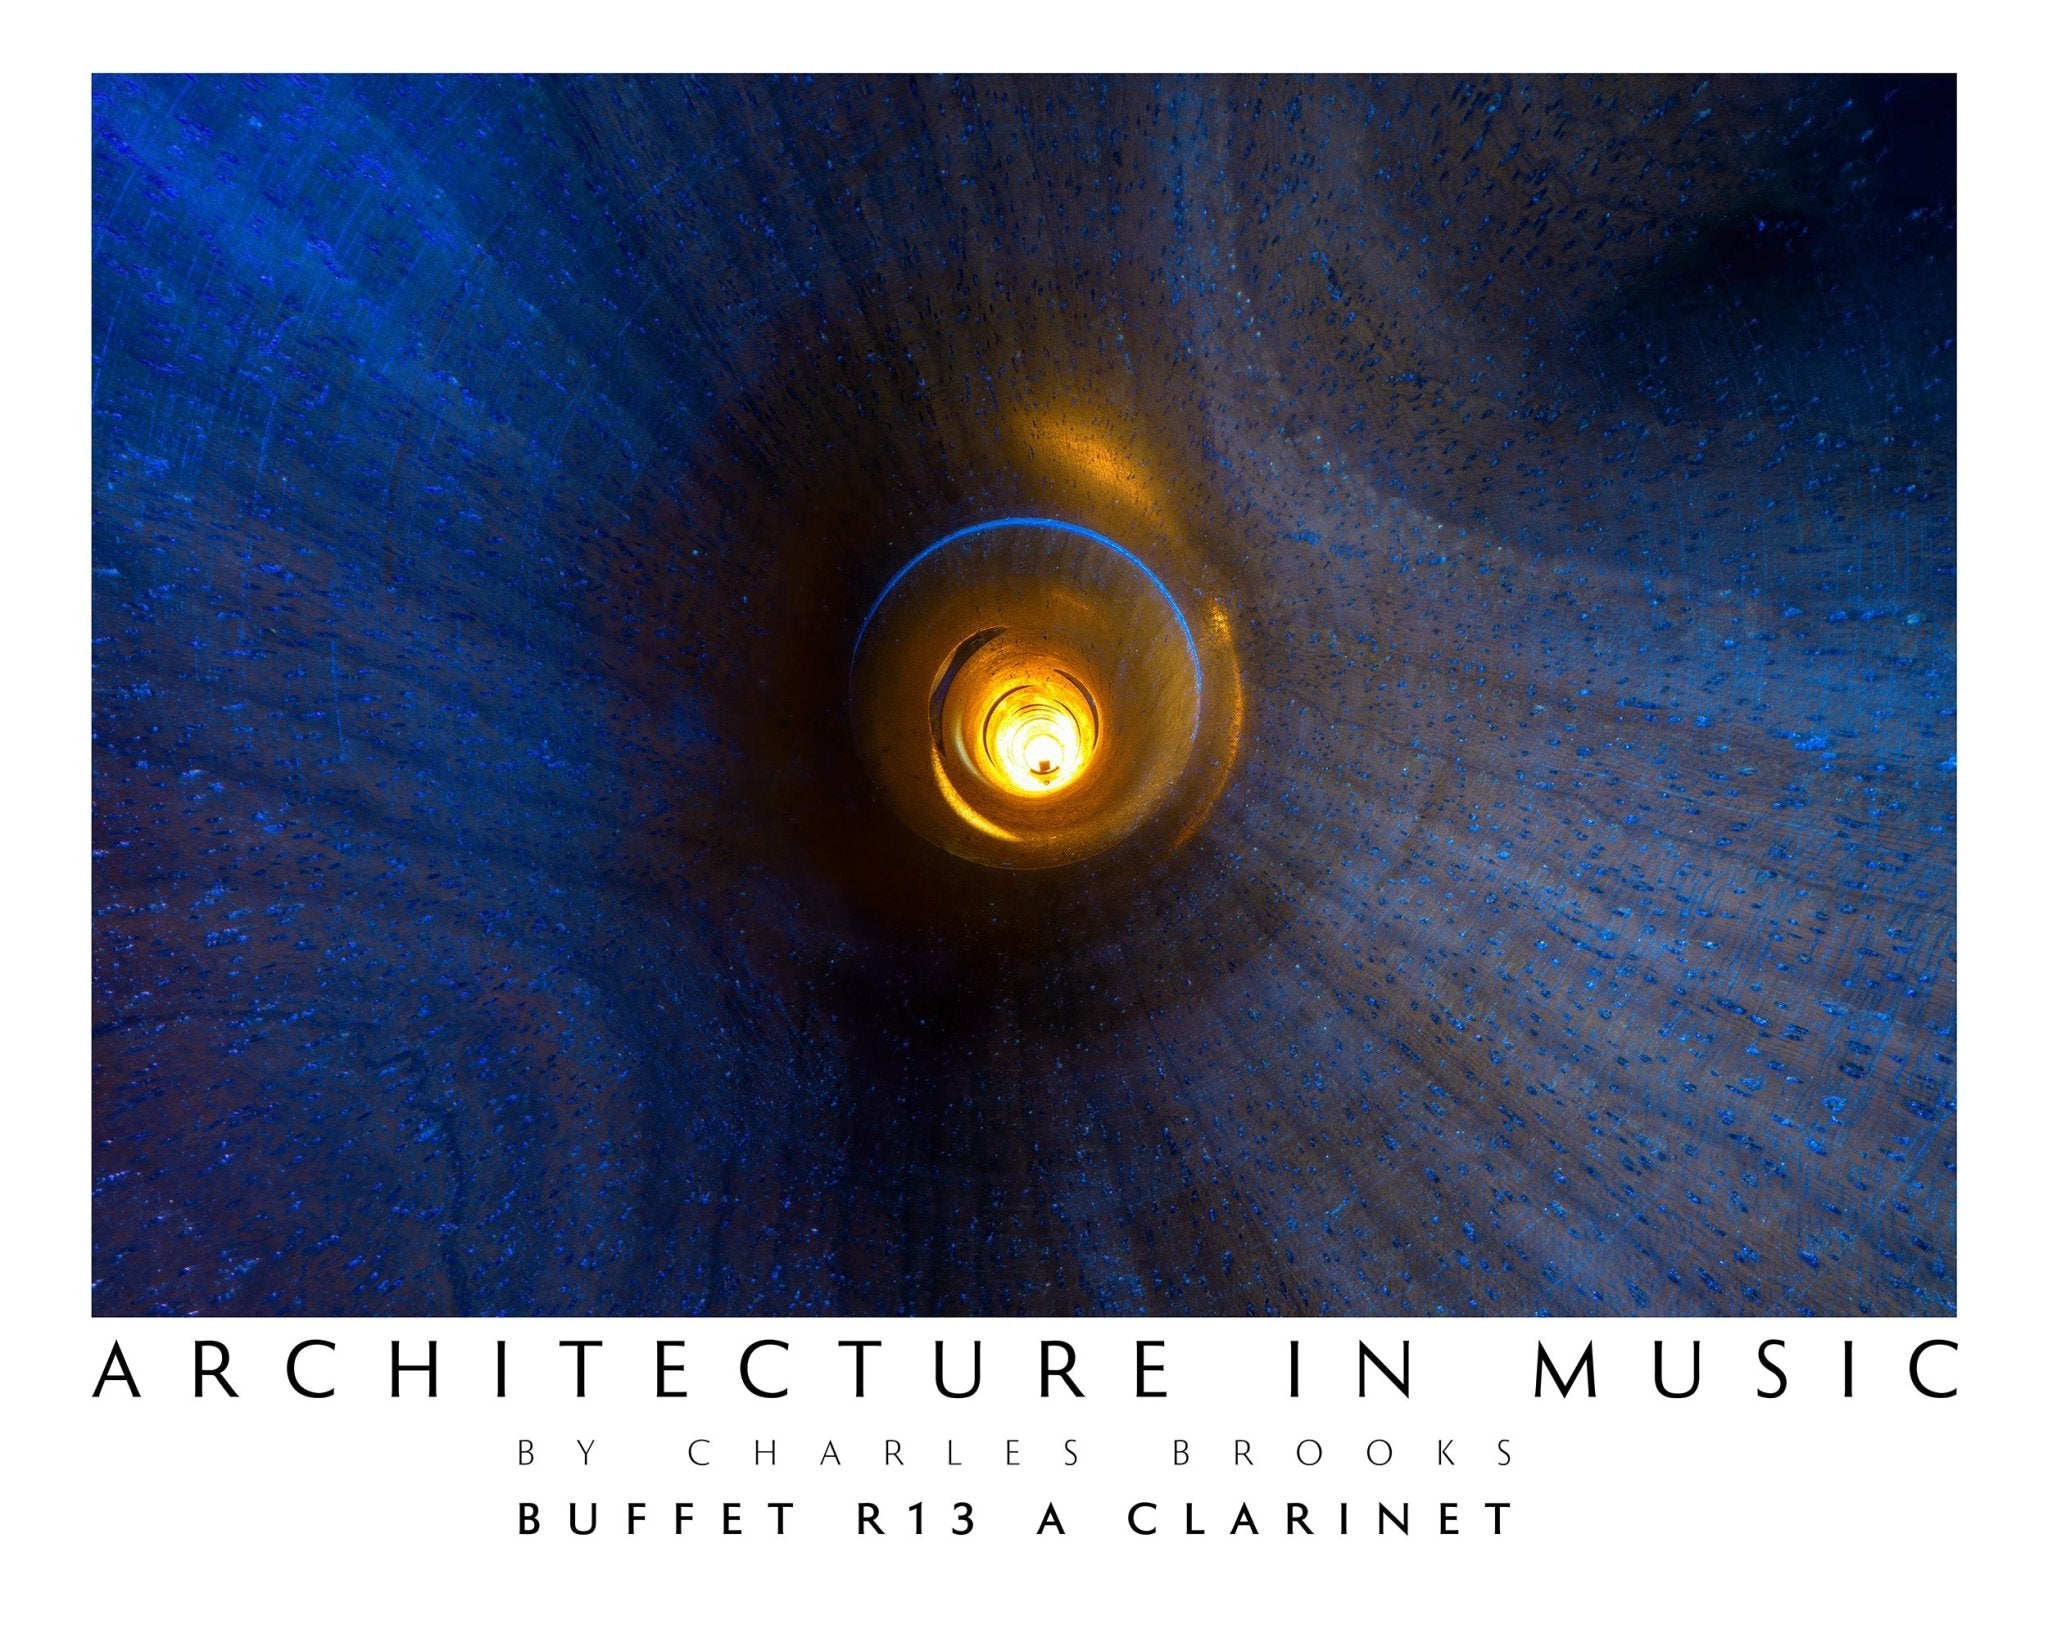 Photo of Buffet R13 A Clarinet, part 2. High Quality Poster. - Giclée Poster Print - Architecture In Music